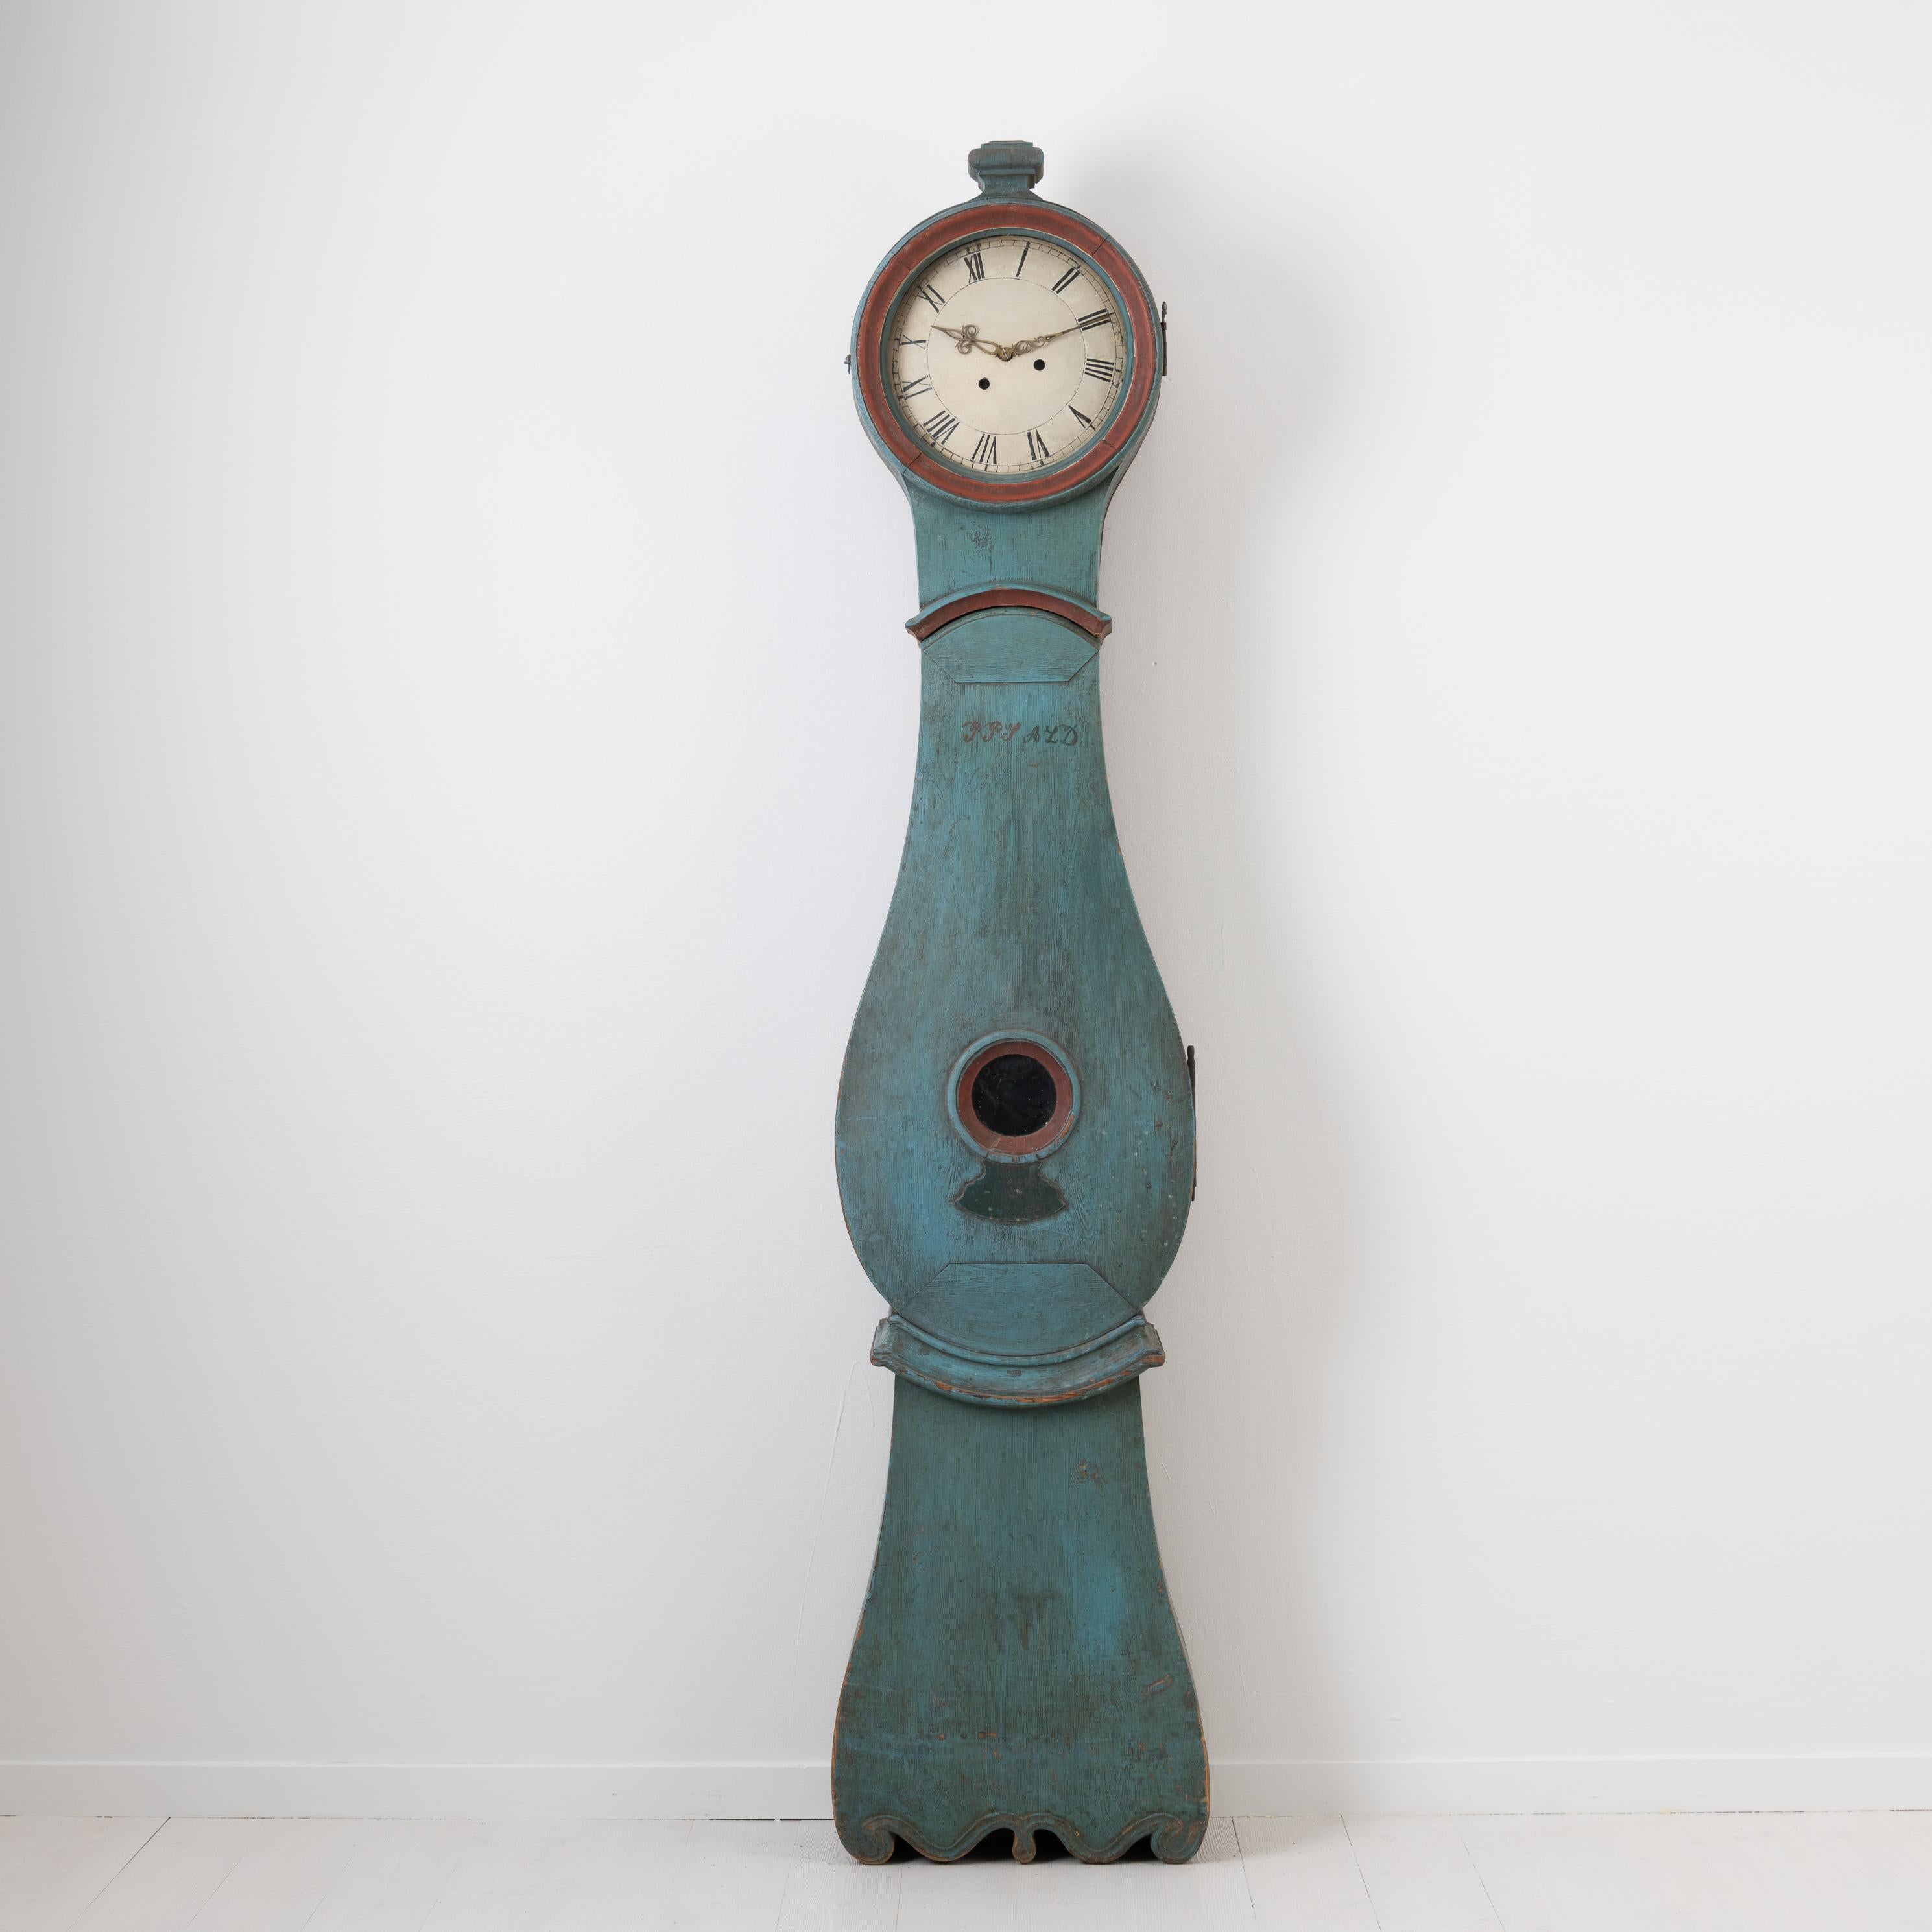 Northern Swedish long case clock from the first half of the 1800s. The clock is made in Swedish pine and painted with the original medium blue paint. The blue paint is original and an indicator of the quality. Blue pigments were very expensive